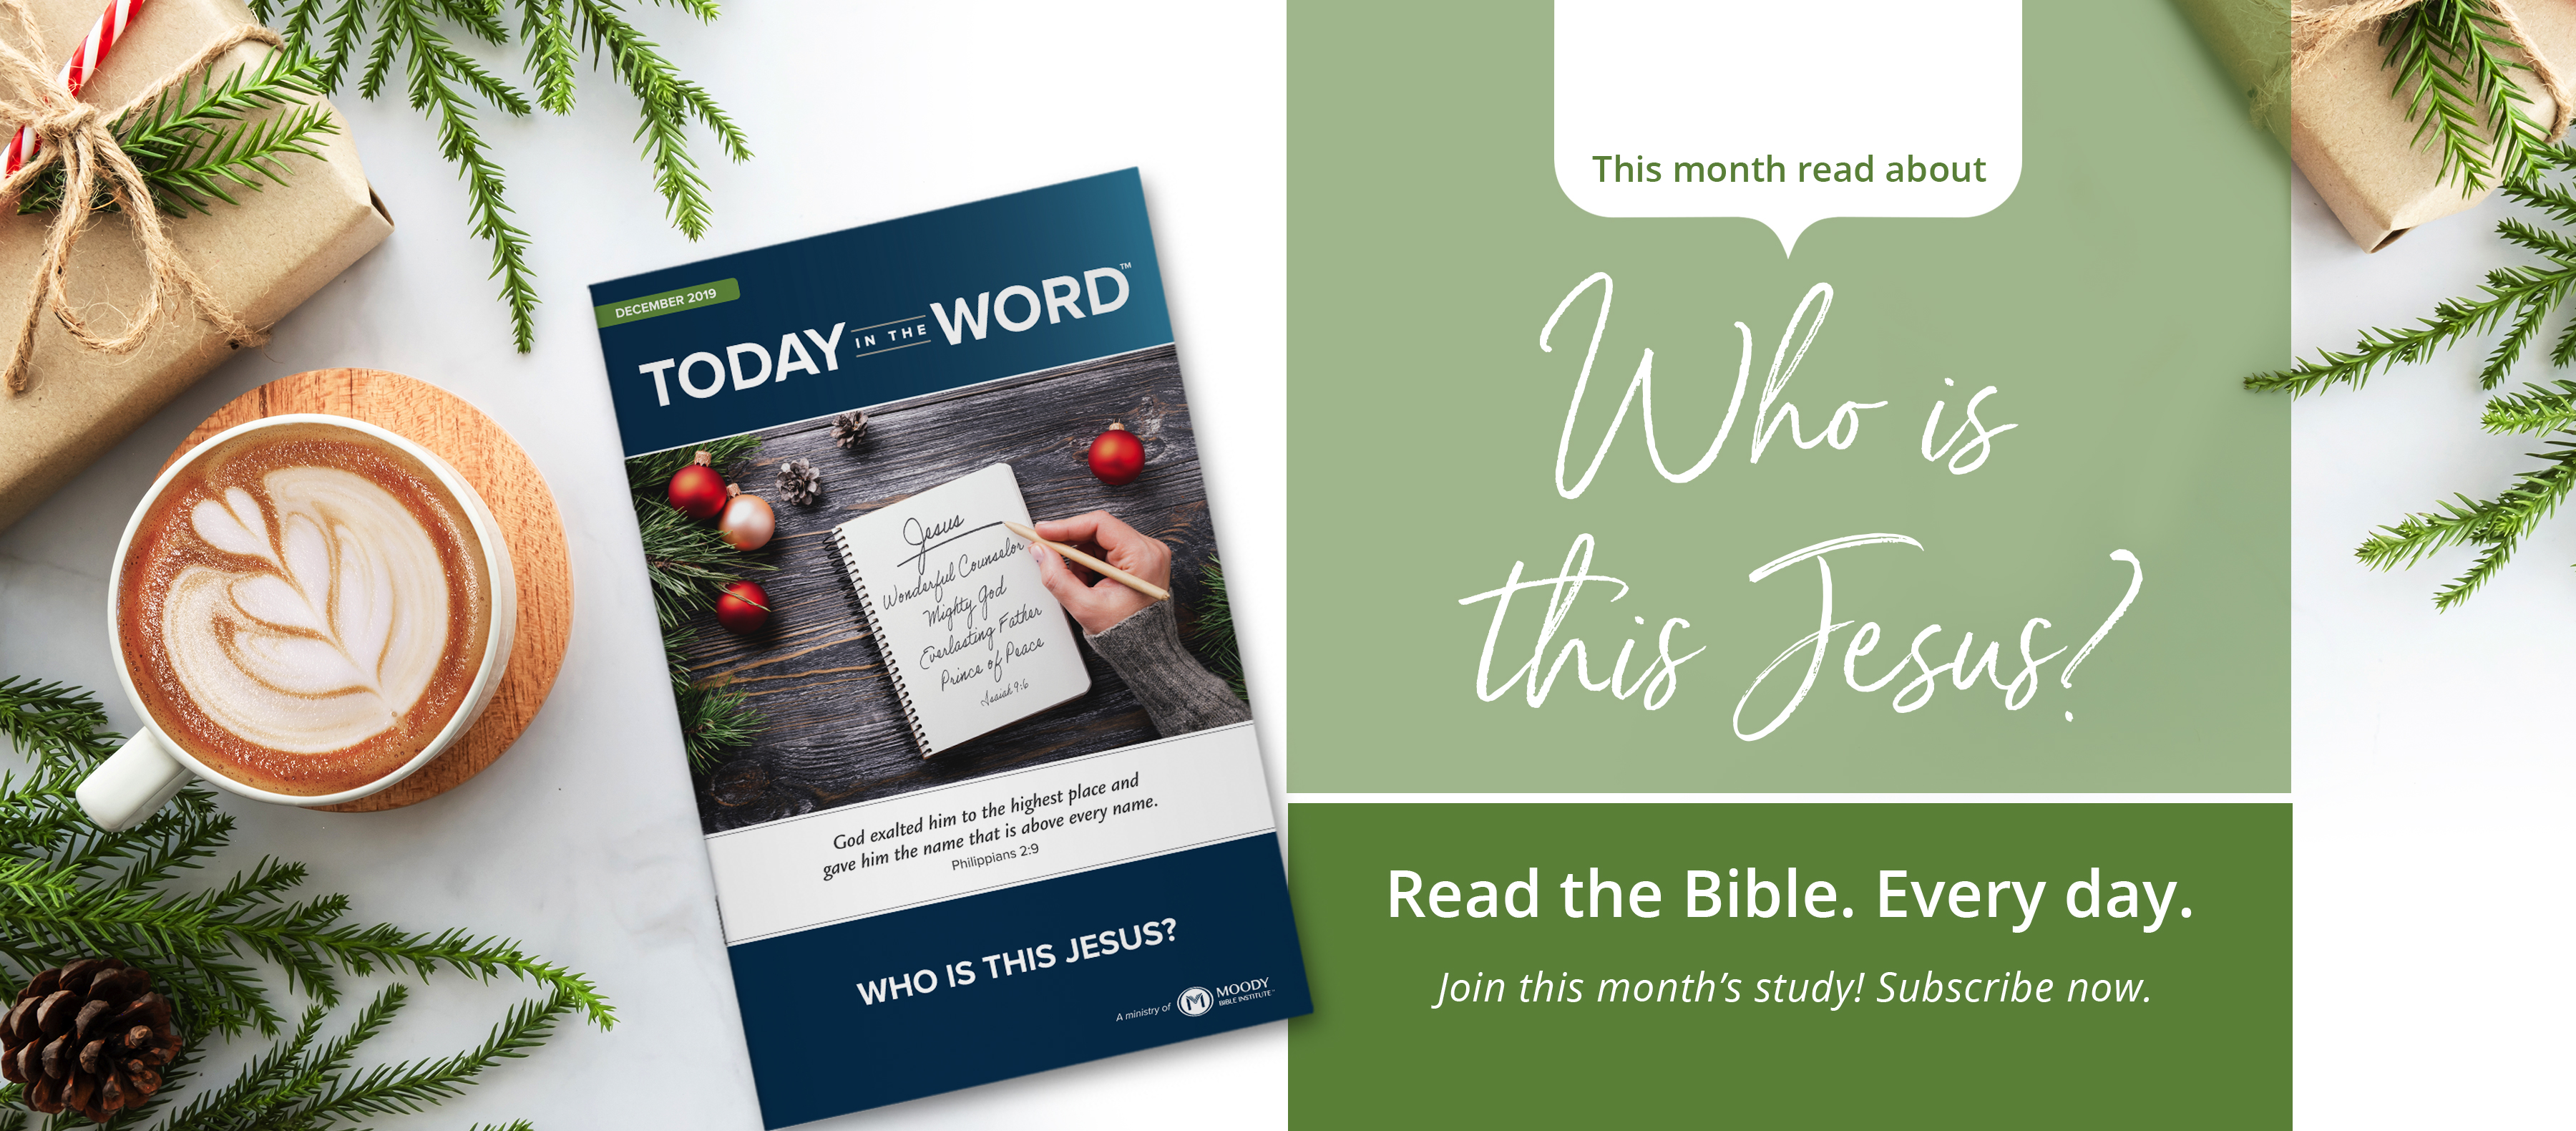 Daily Devotional | The Model for Servanthood